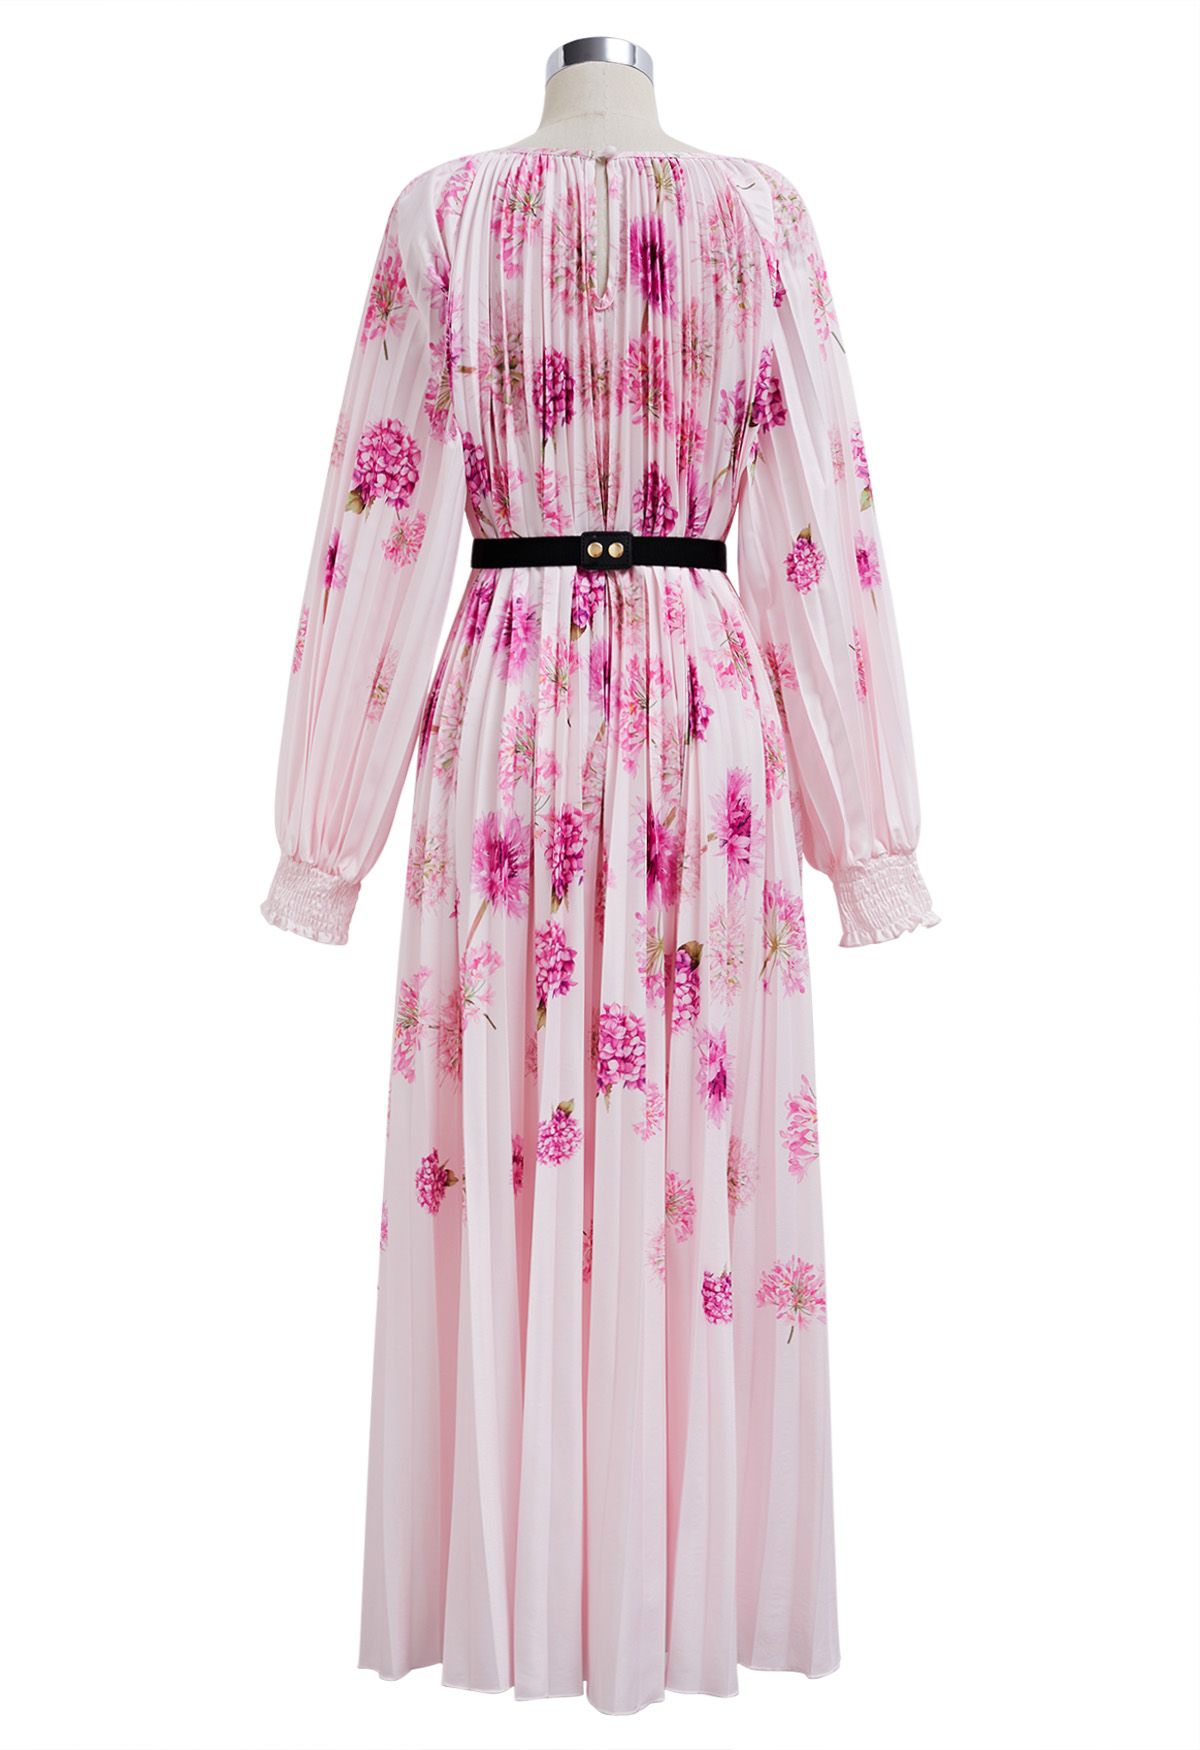 Blossoming Day Watercolor Pleated Maxi Dress in Pink